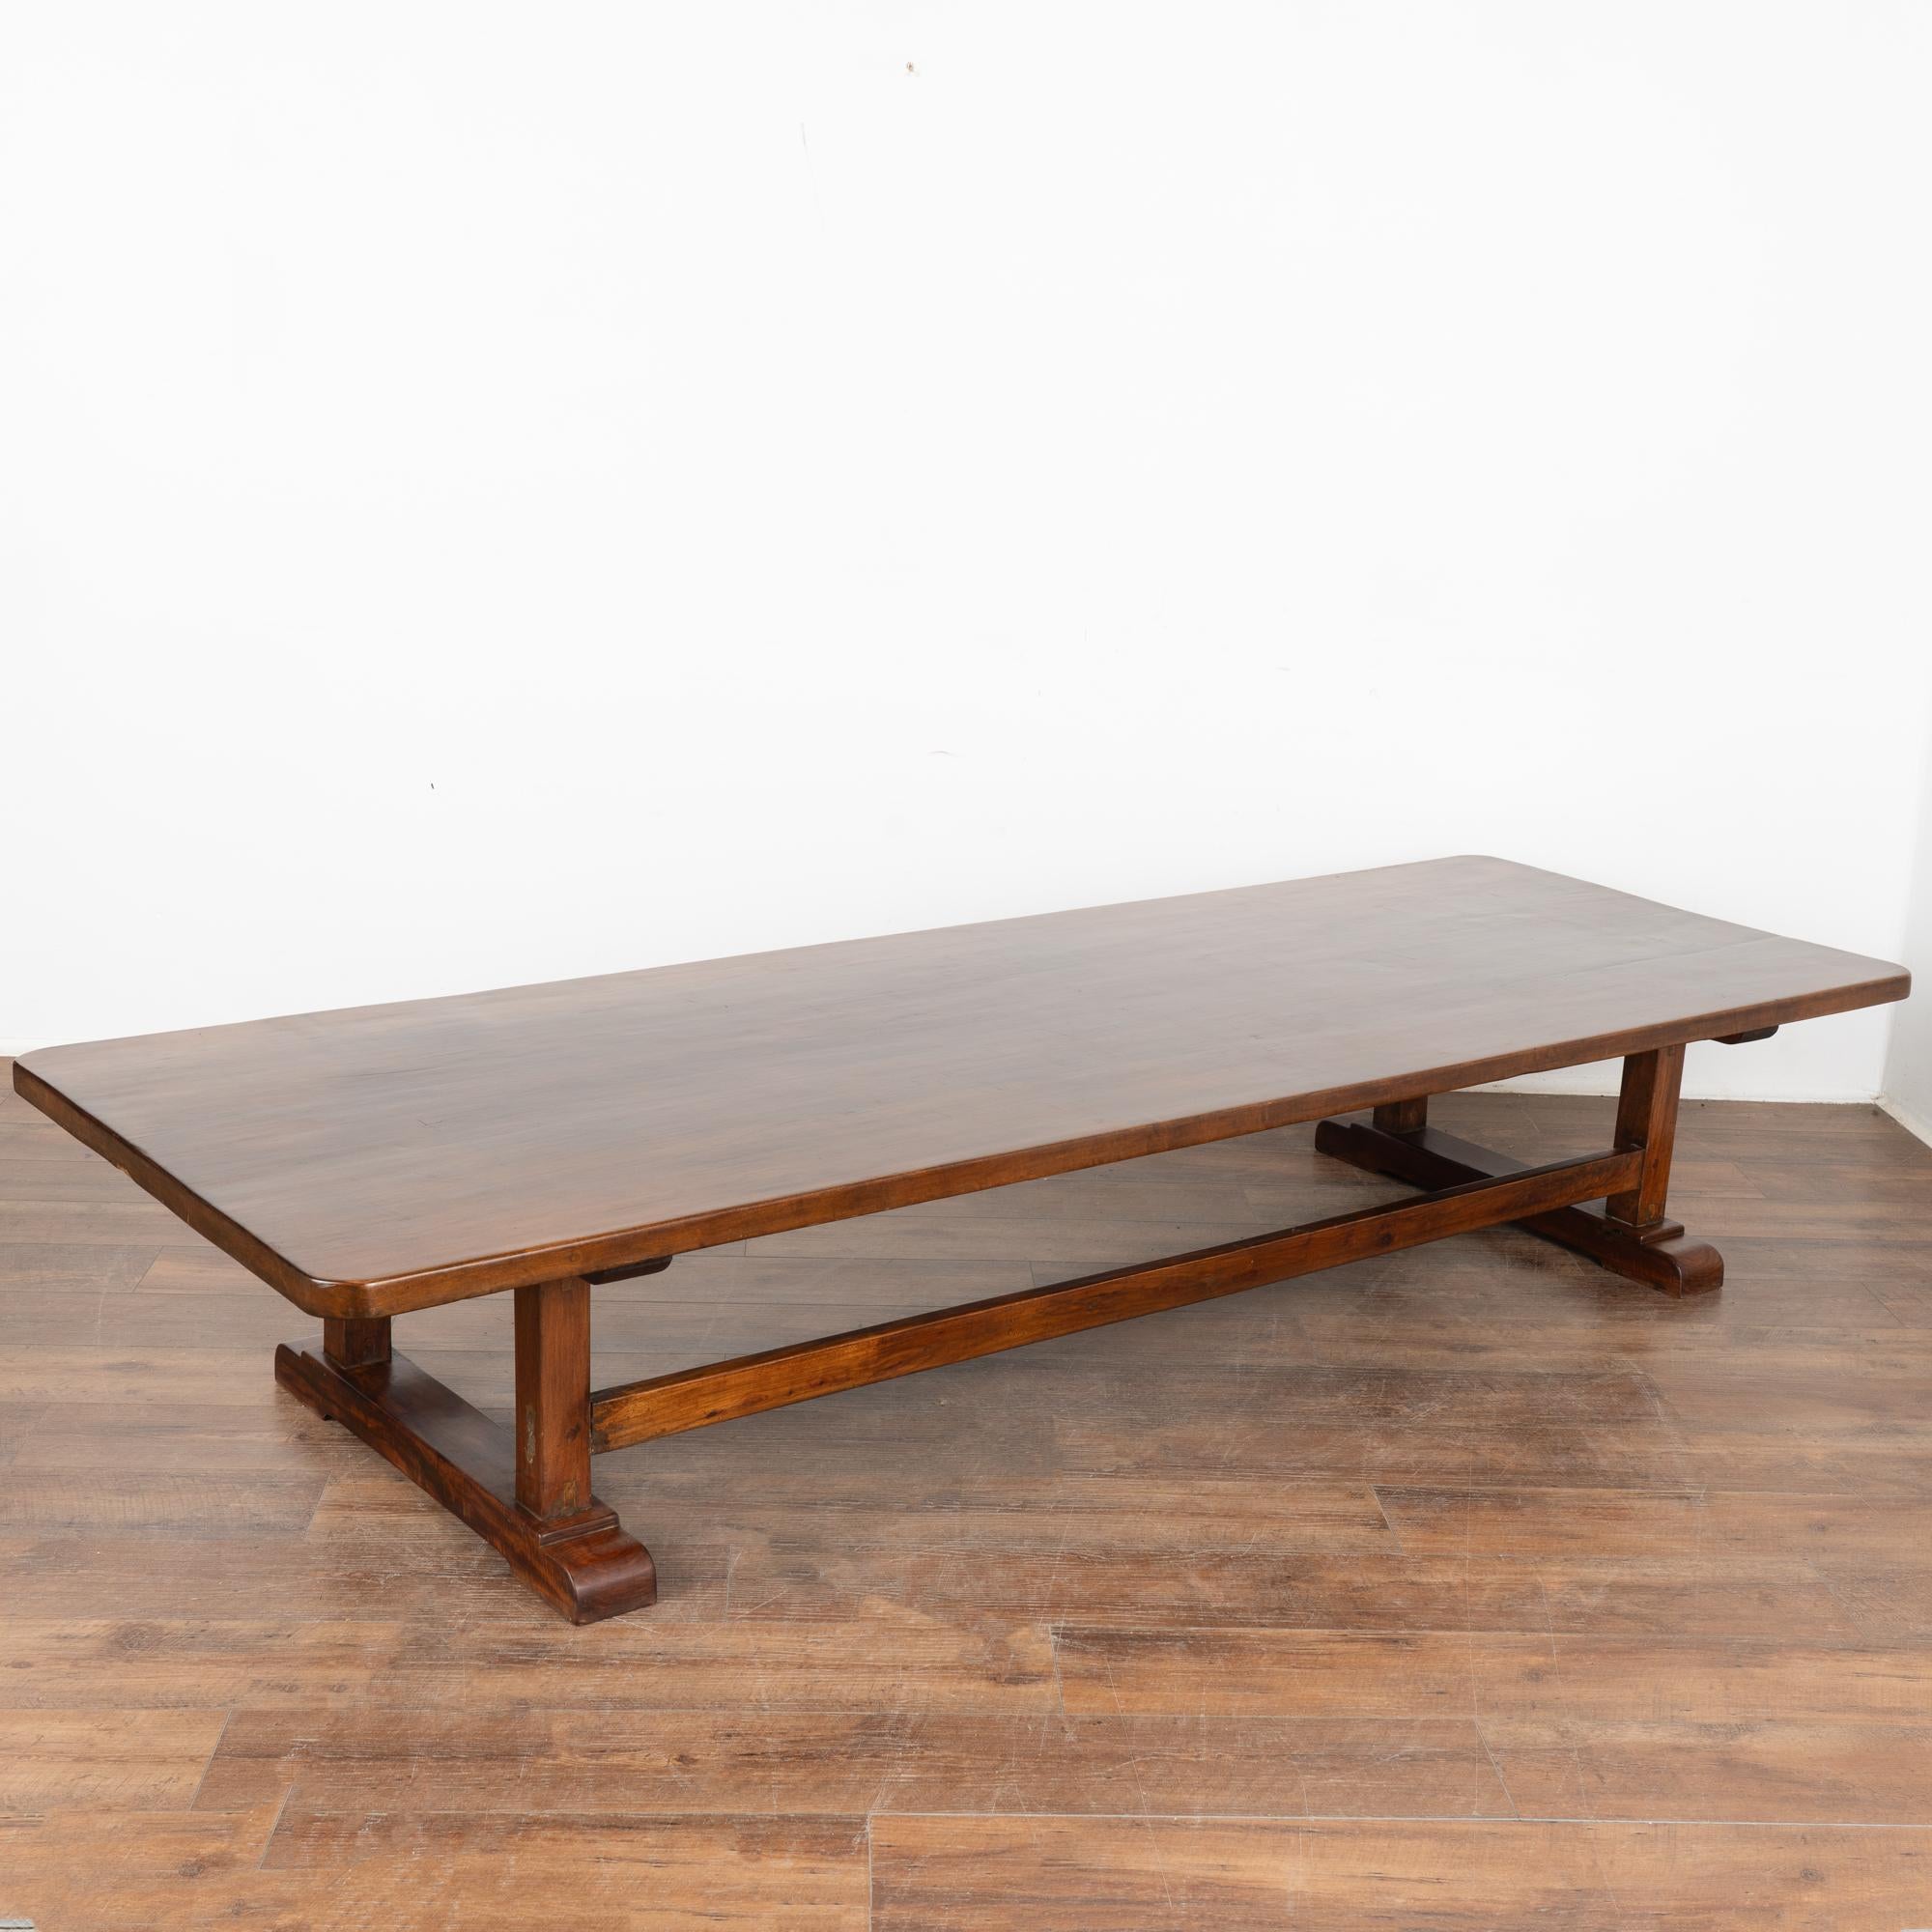 The beauty of this 9' long coffee table is found in the rich patina of the aged elm wood.
Every nick and stain add to the depth and richness found in the beauty of the top, resting on two long stretchers.
Restored, strong and stable. Any scratches,